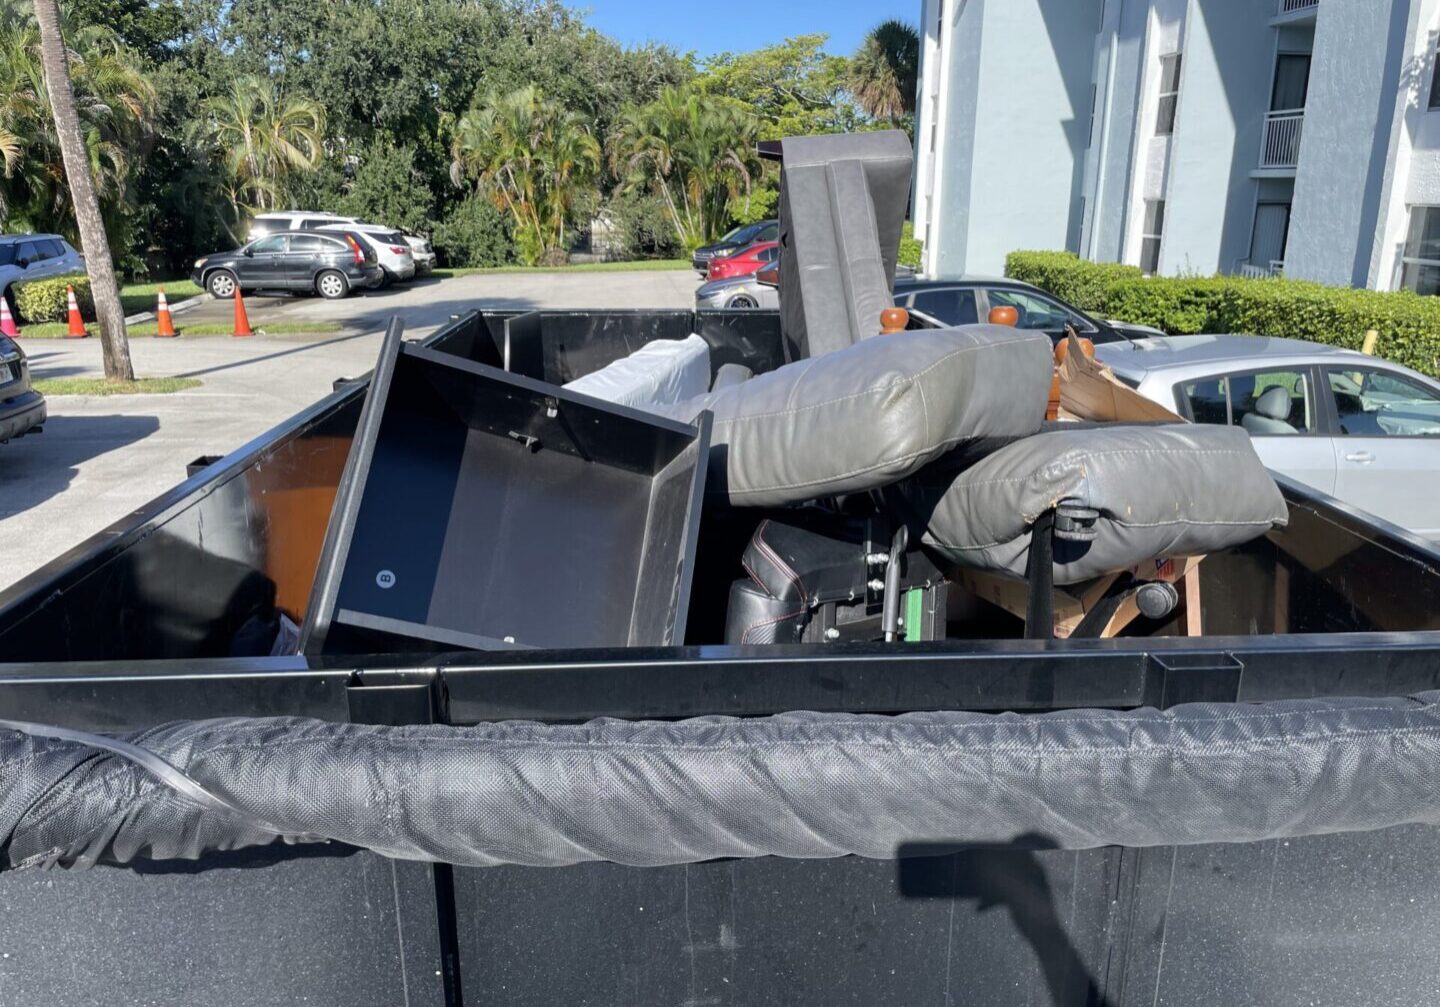 A dumpster full of junk sitting next to a building.